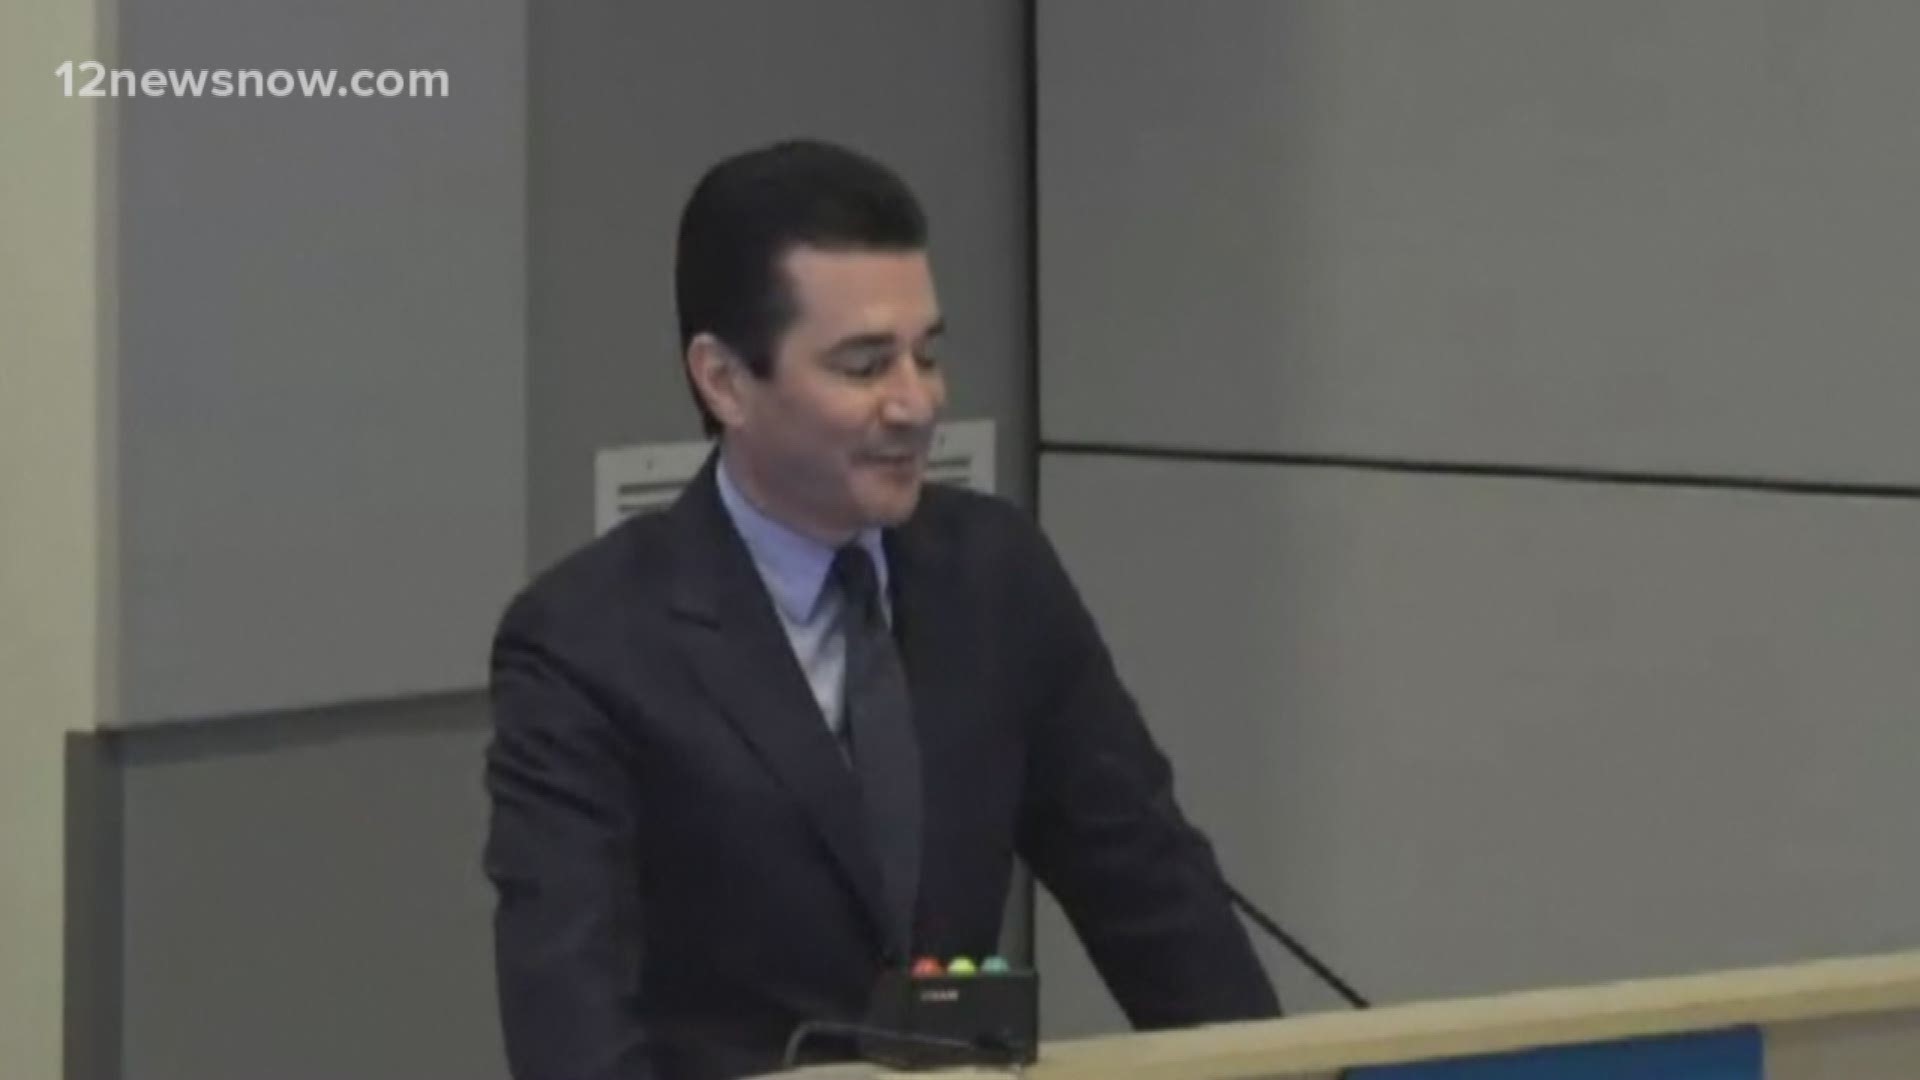 FDA talks about challenges due to the government shutdown